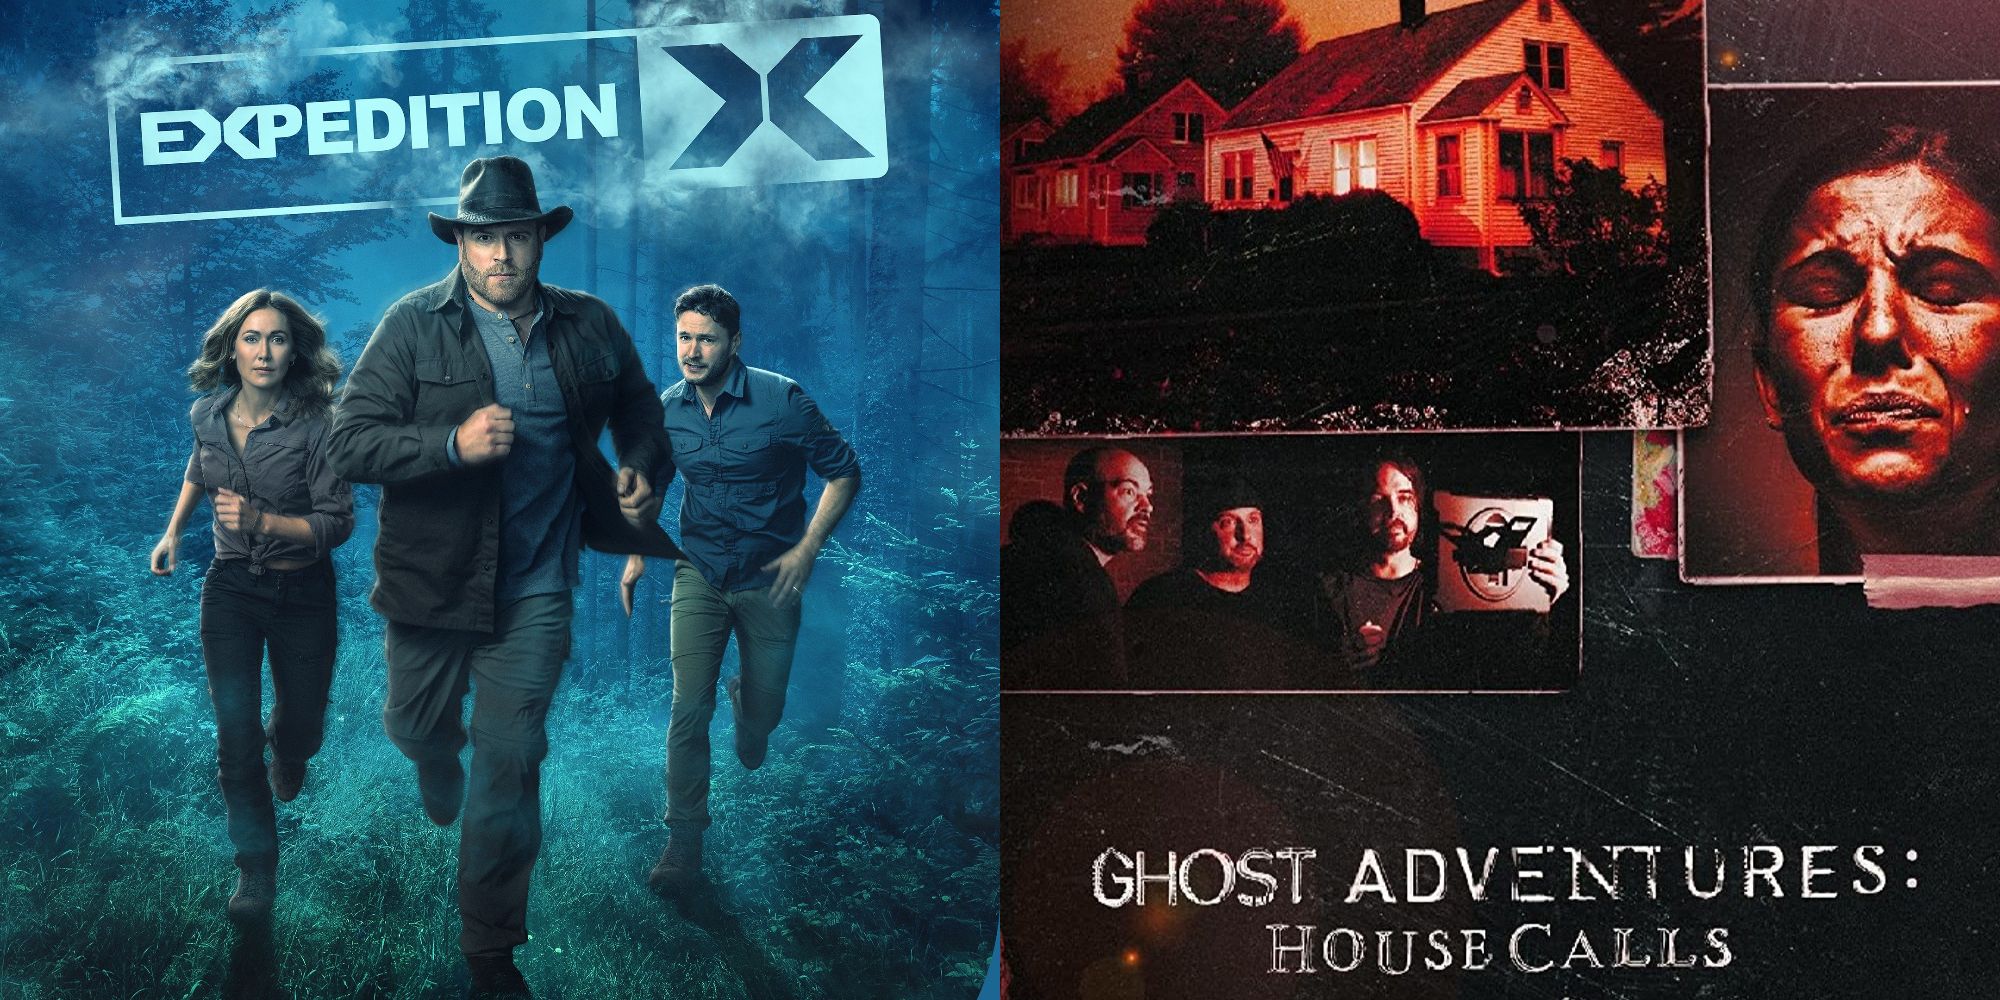 10 Best Paranormal TV Shows To Watch On Discovery